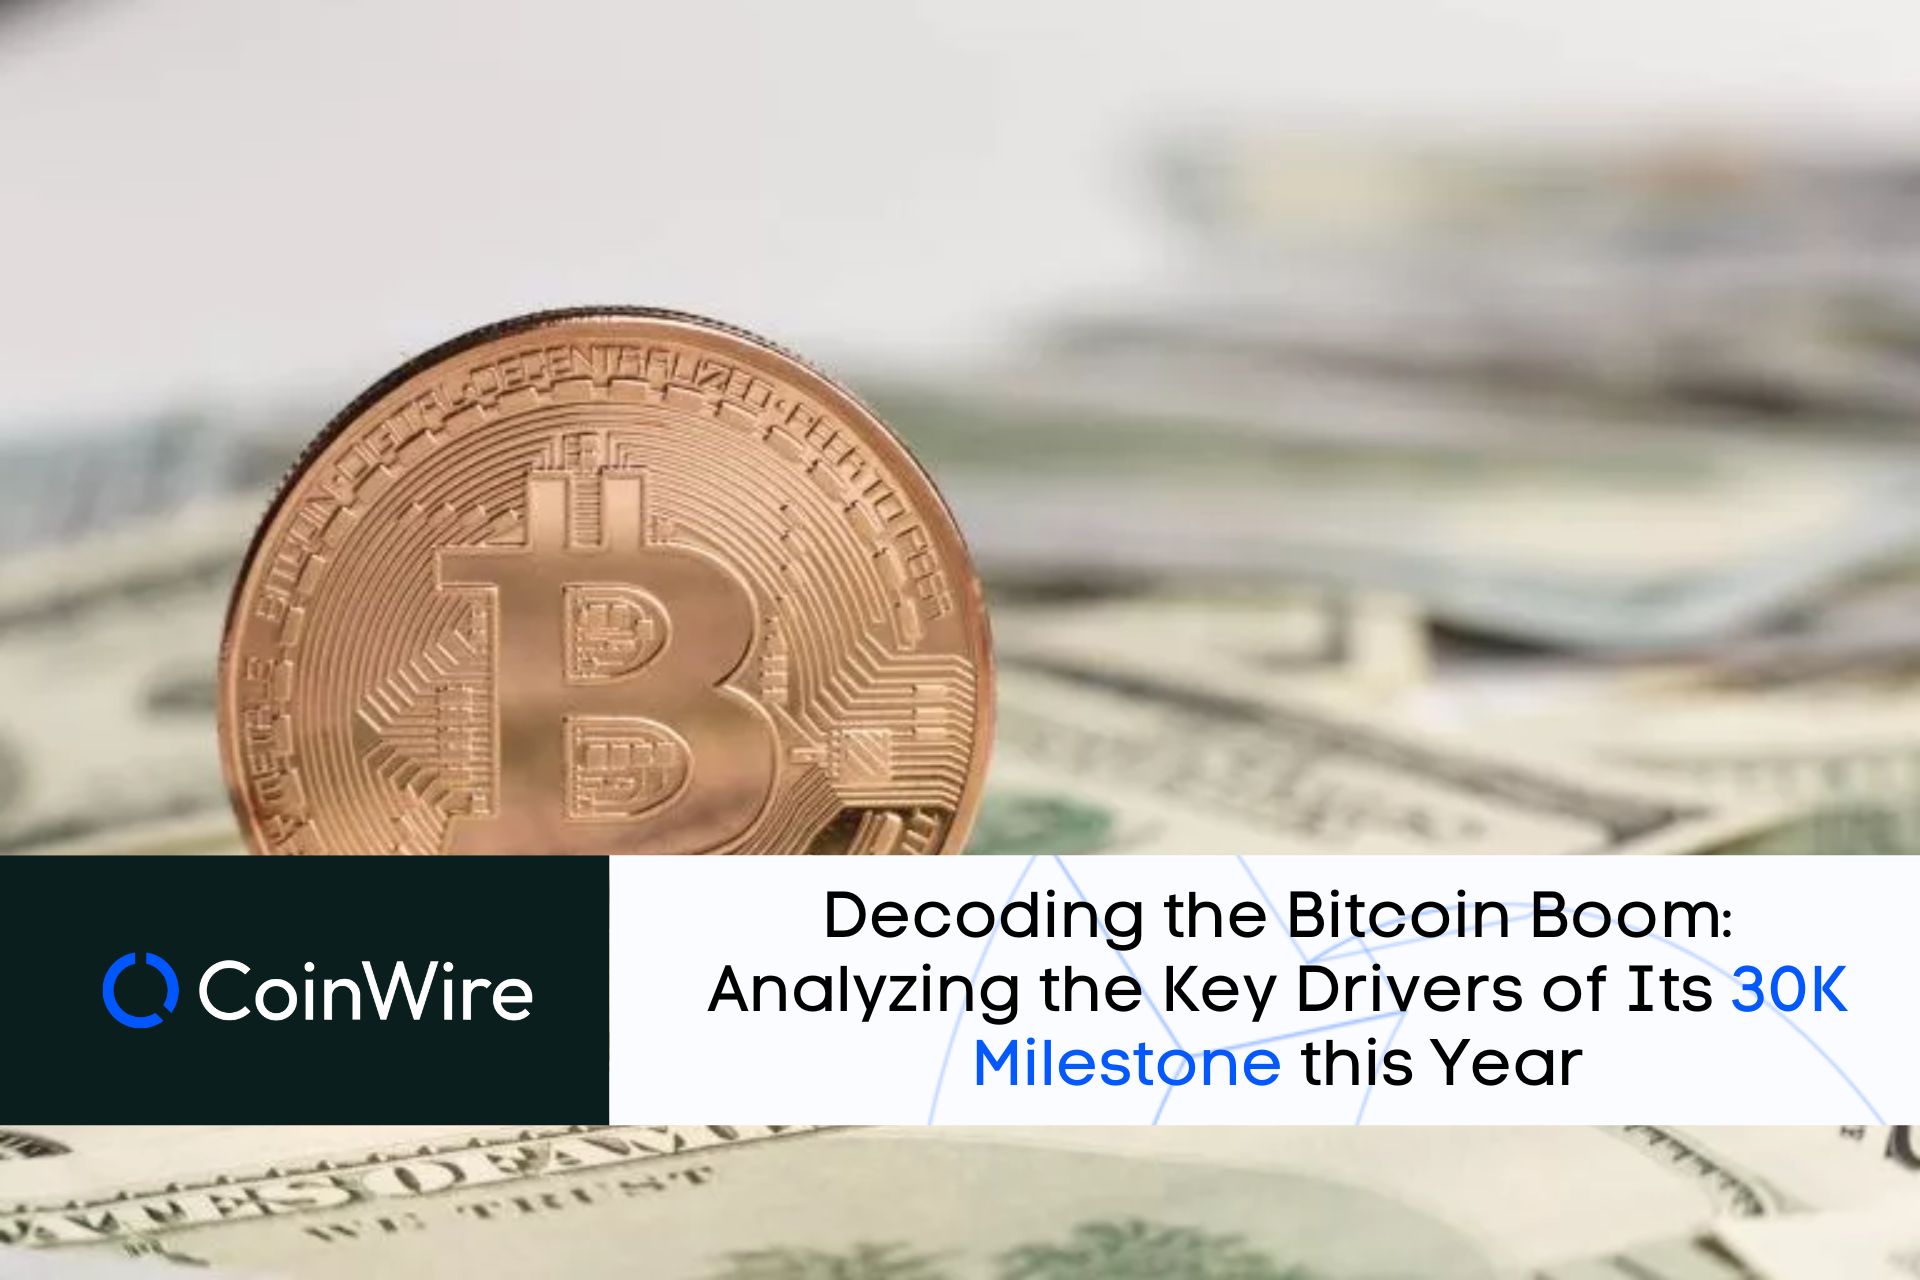 Decoding The Bitcoin Boom: Analyzing The Key Drivers Of Its 30K Milestone This Year